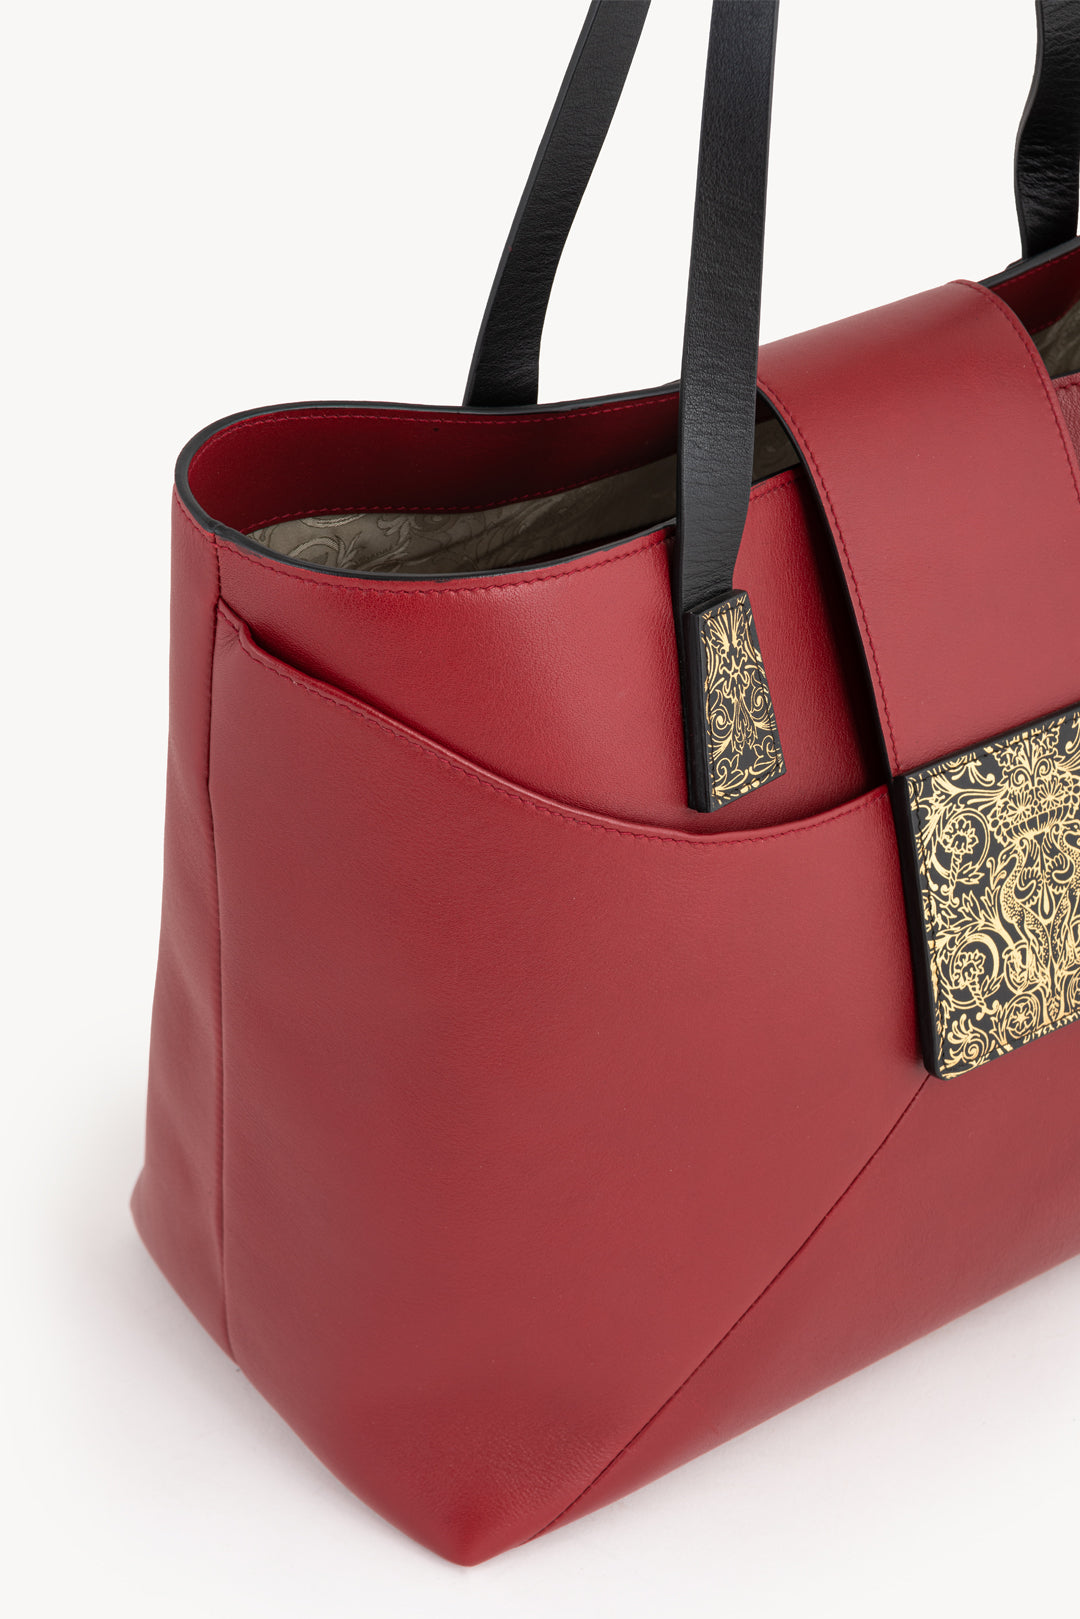 Shopping bag in leather - Red